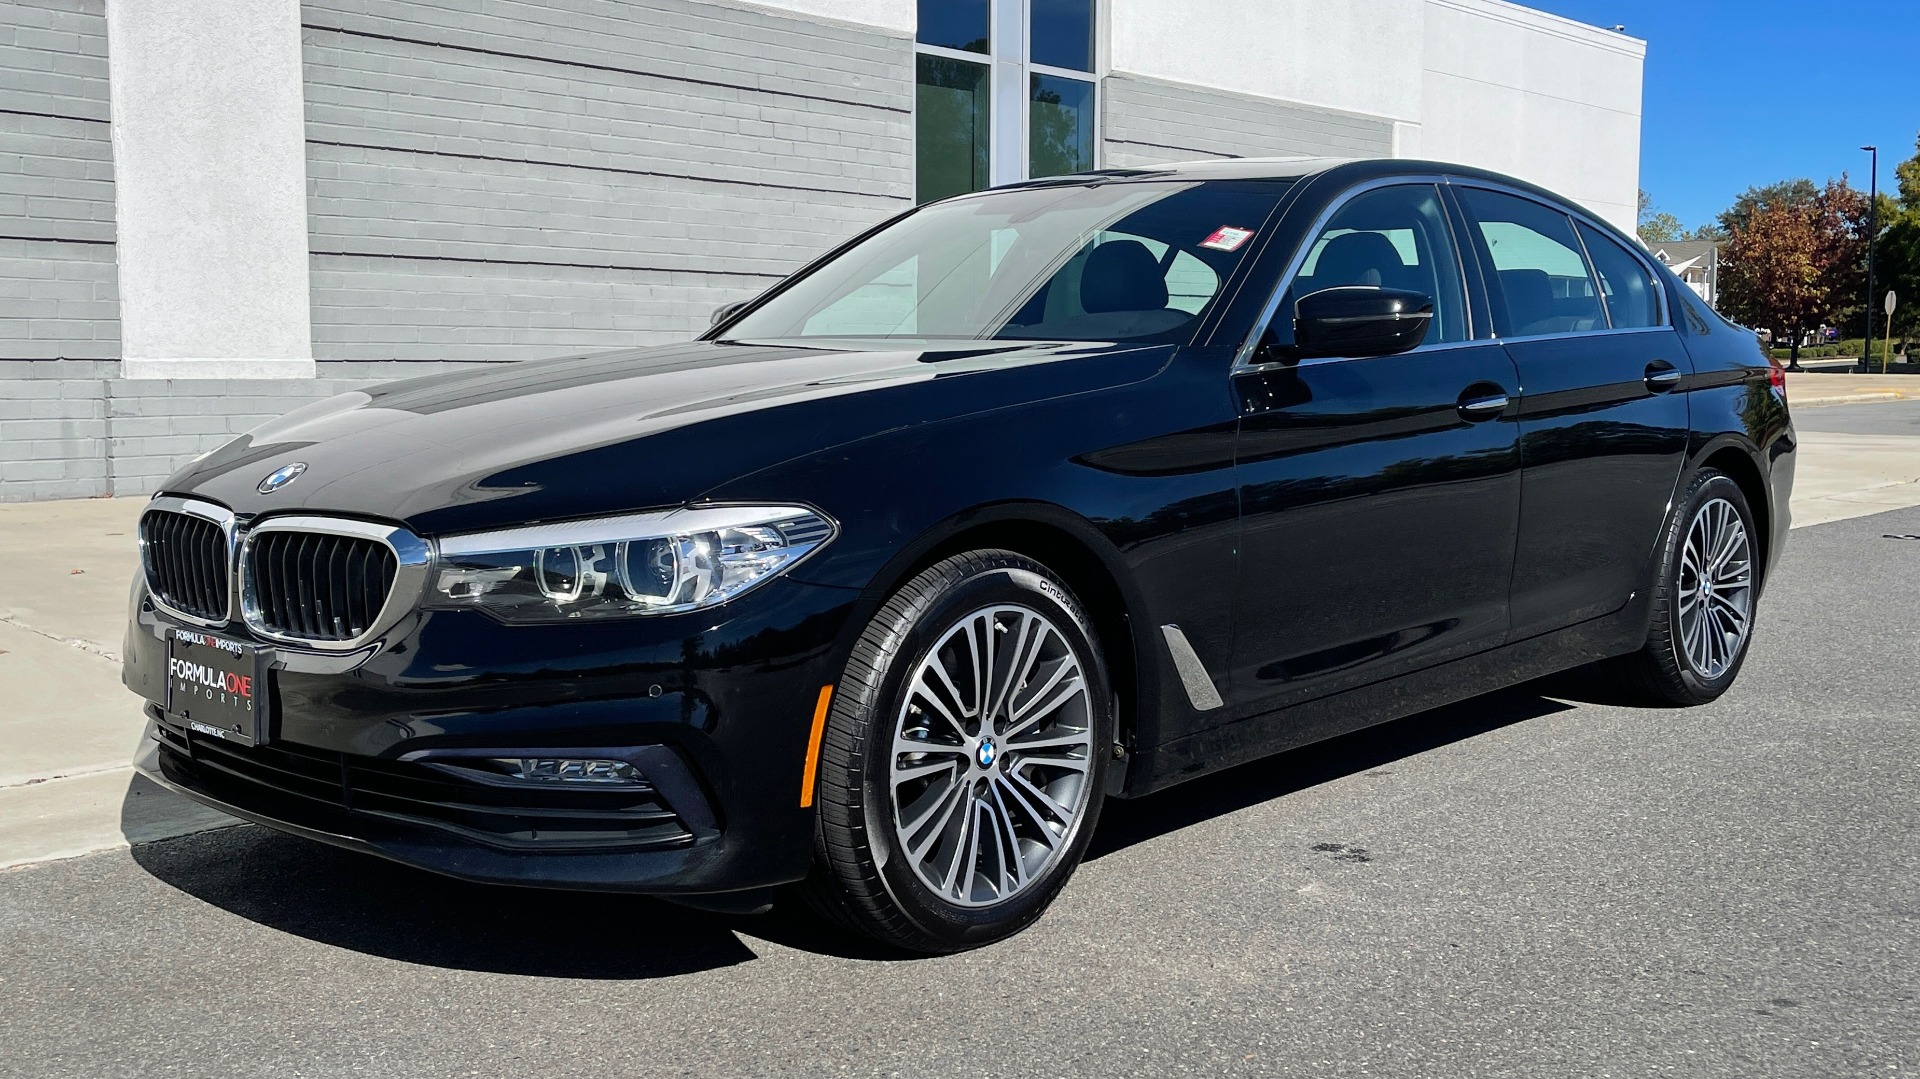 Used 2018 BMW 5 SERIES 530I XDRIVE 2.0L / 8-SPD AUTO / NAV / SUNROOF / REARVIEW for sale $33,295 at Formula Imports in Charlotte NC 28227 2